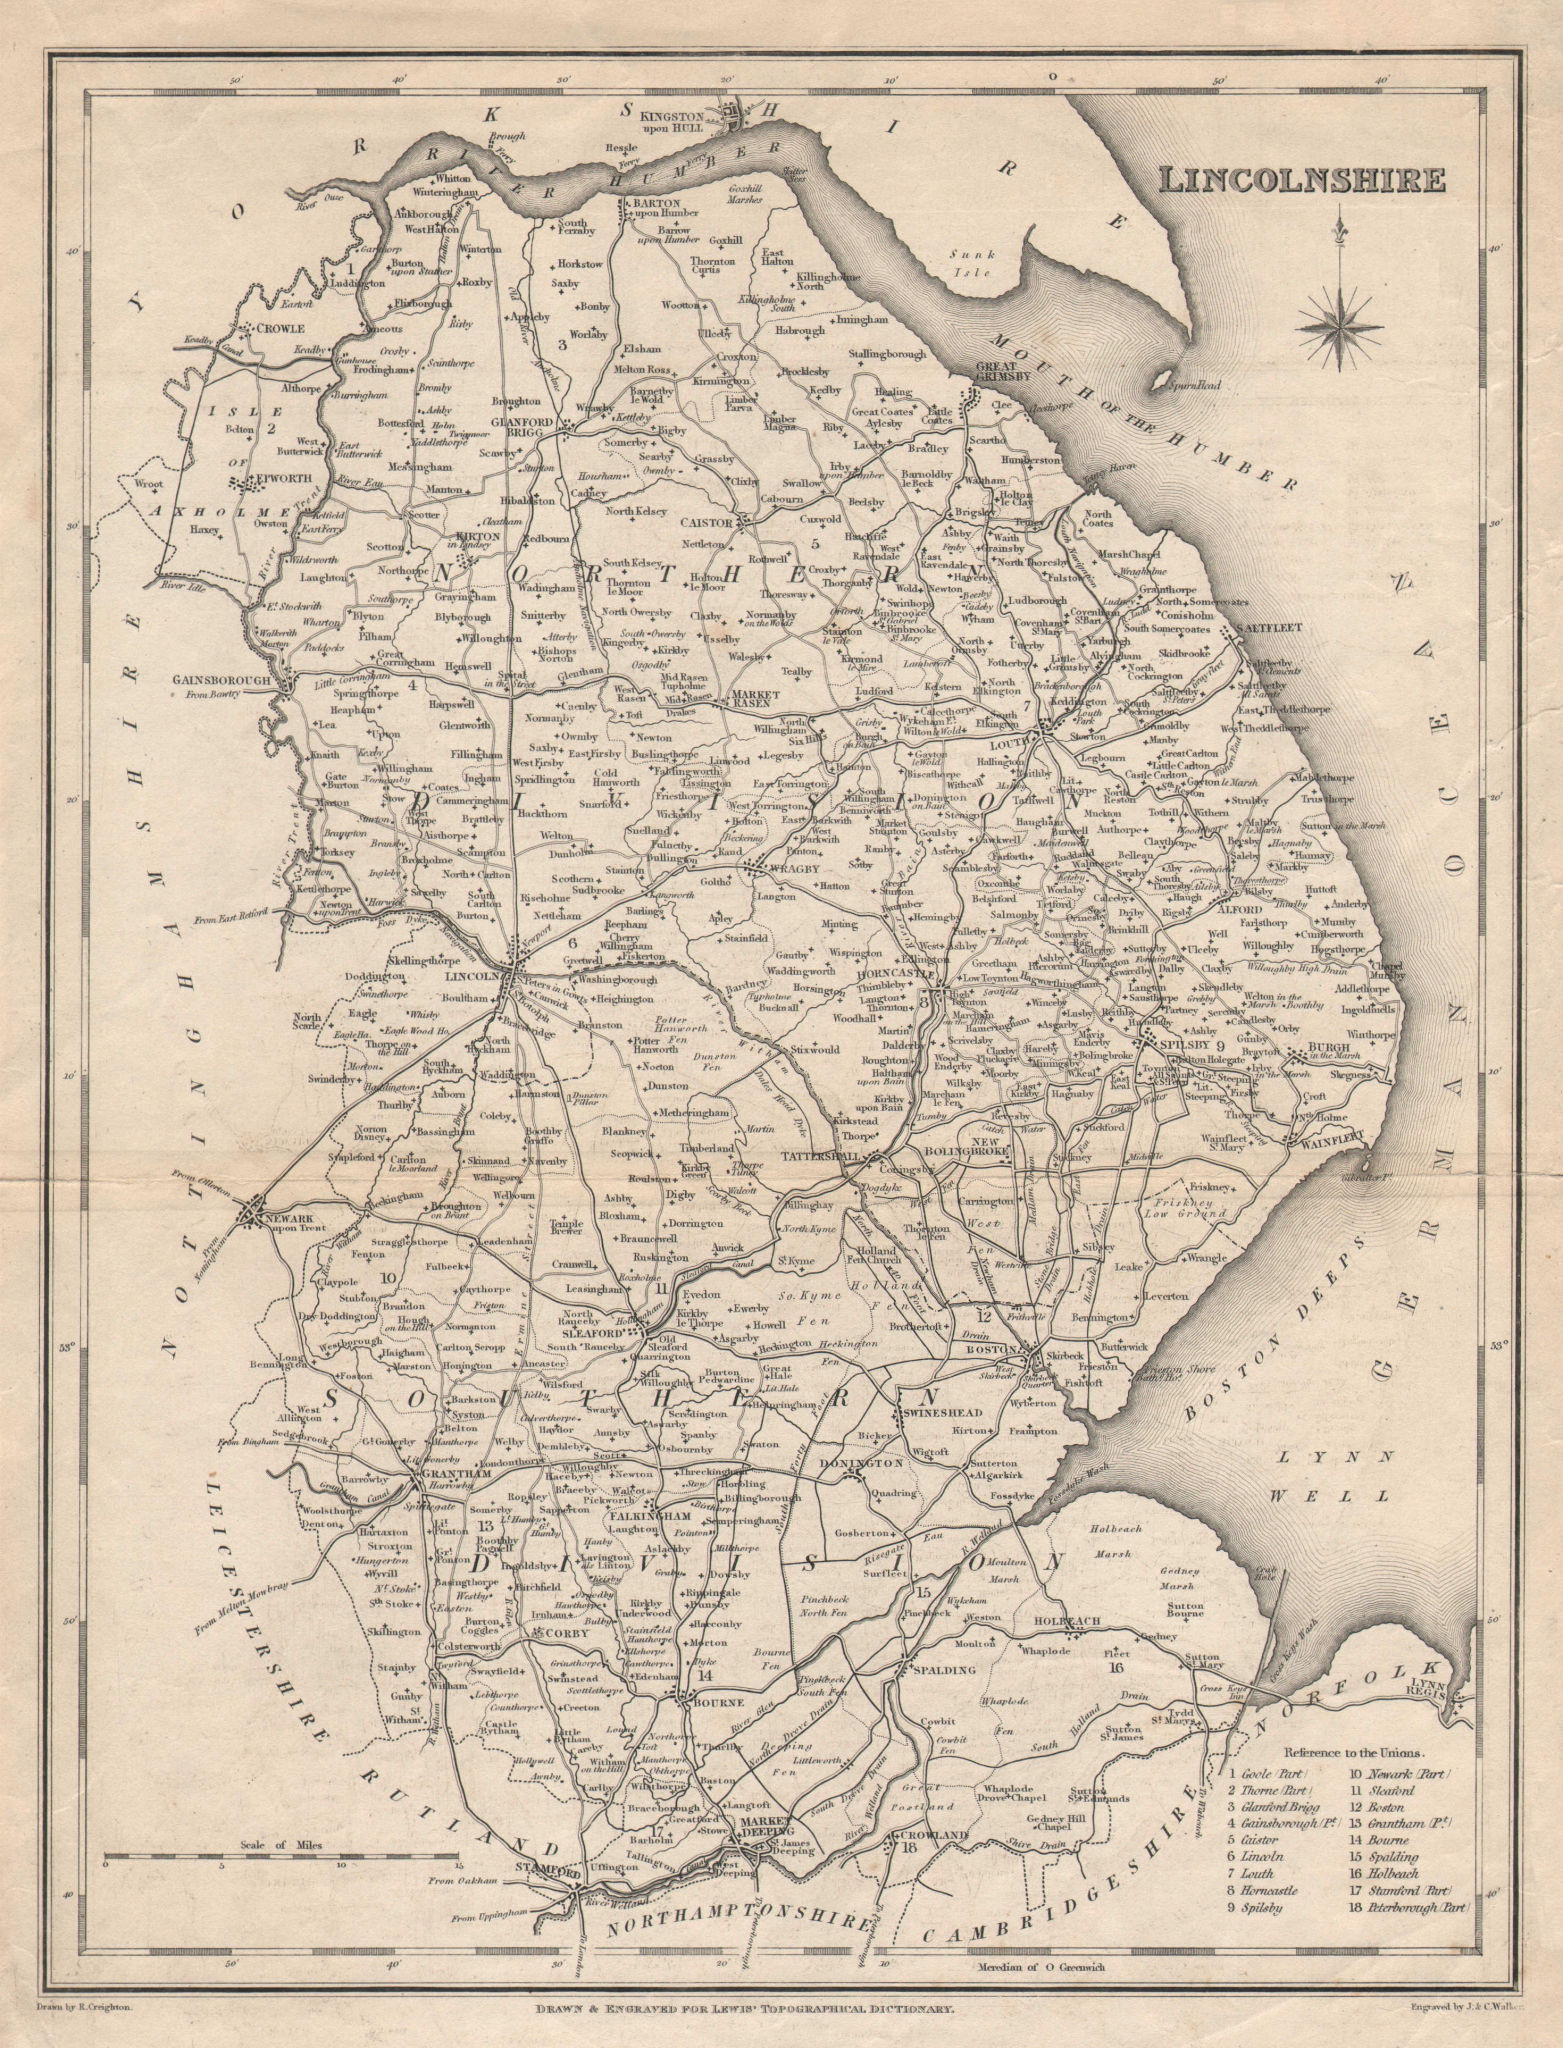 Associate Product Antique county map of LINCOLNSHIRE by Walker & Creighton for Lewis c1840